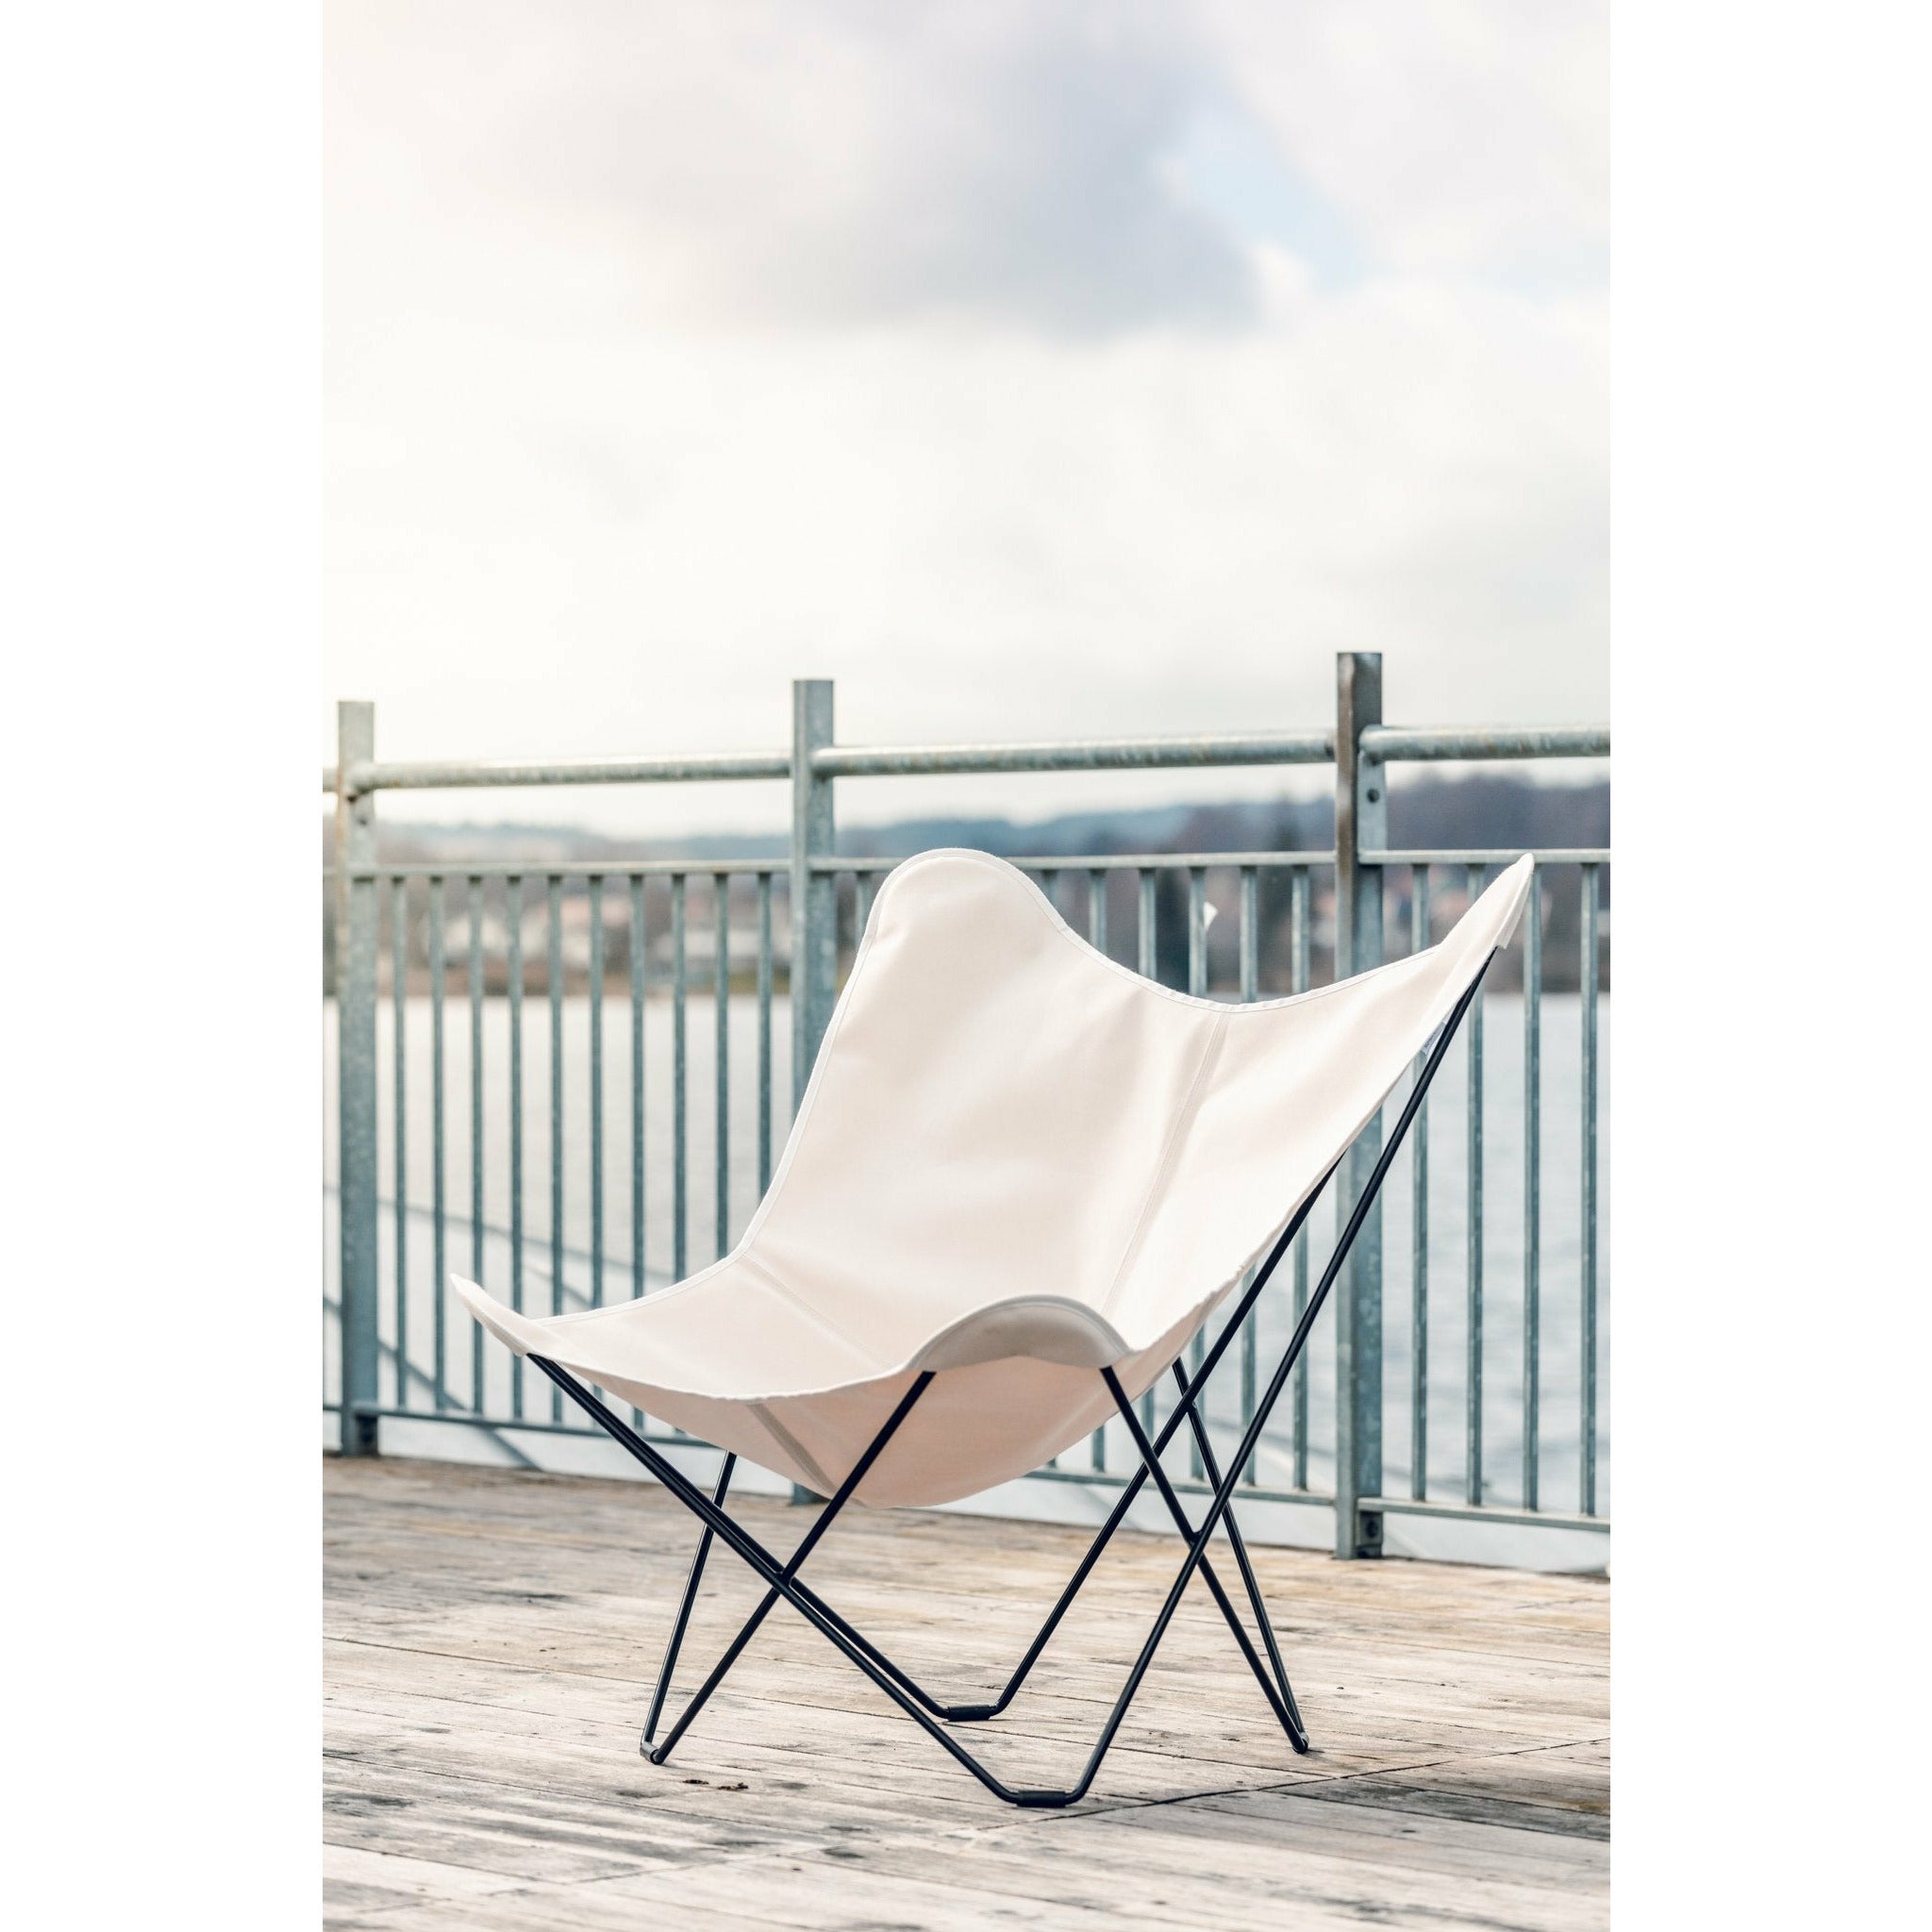 Cuero Sunshine Mariposa Butterfly Chaise, Oyster / Grey Outdoor Cadre